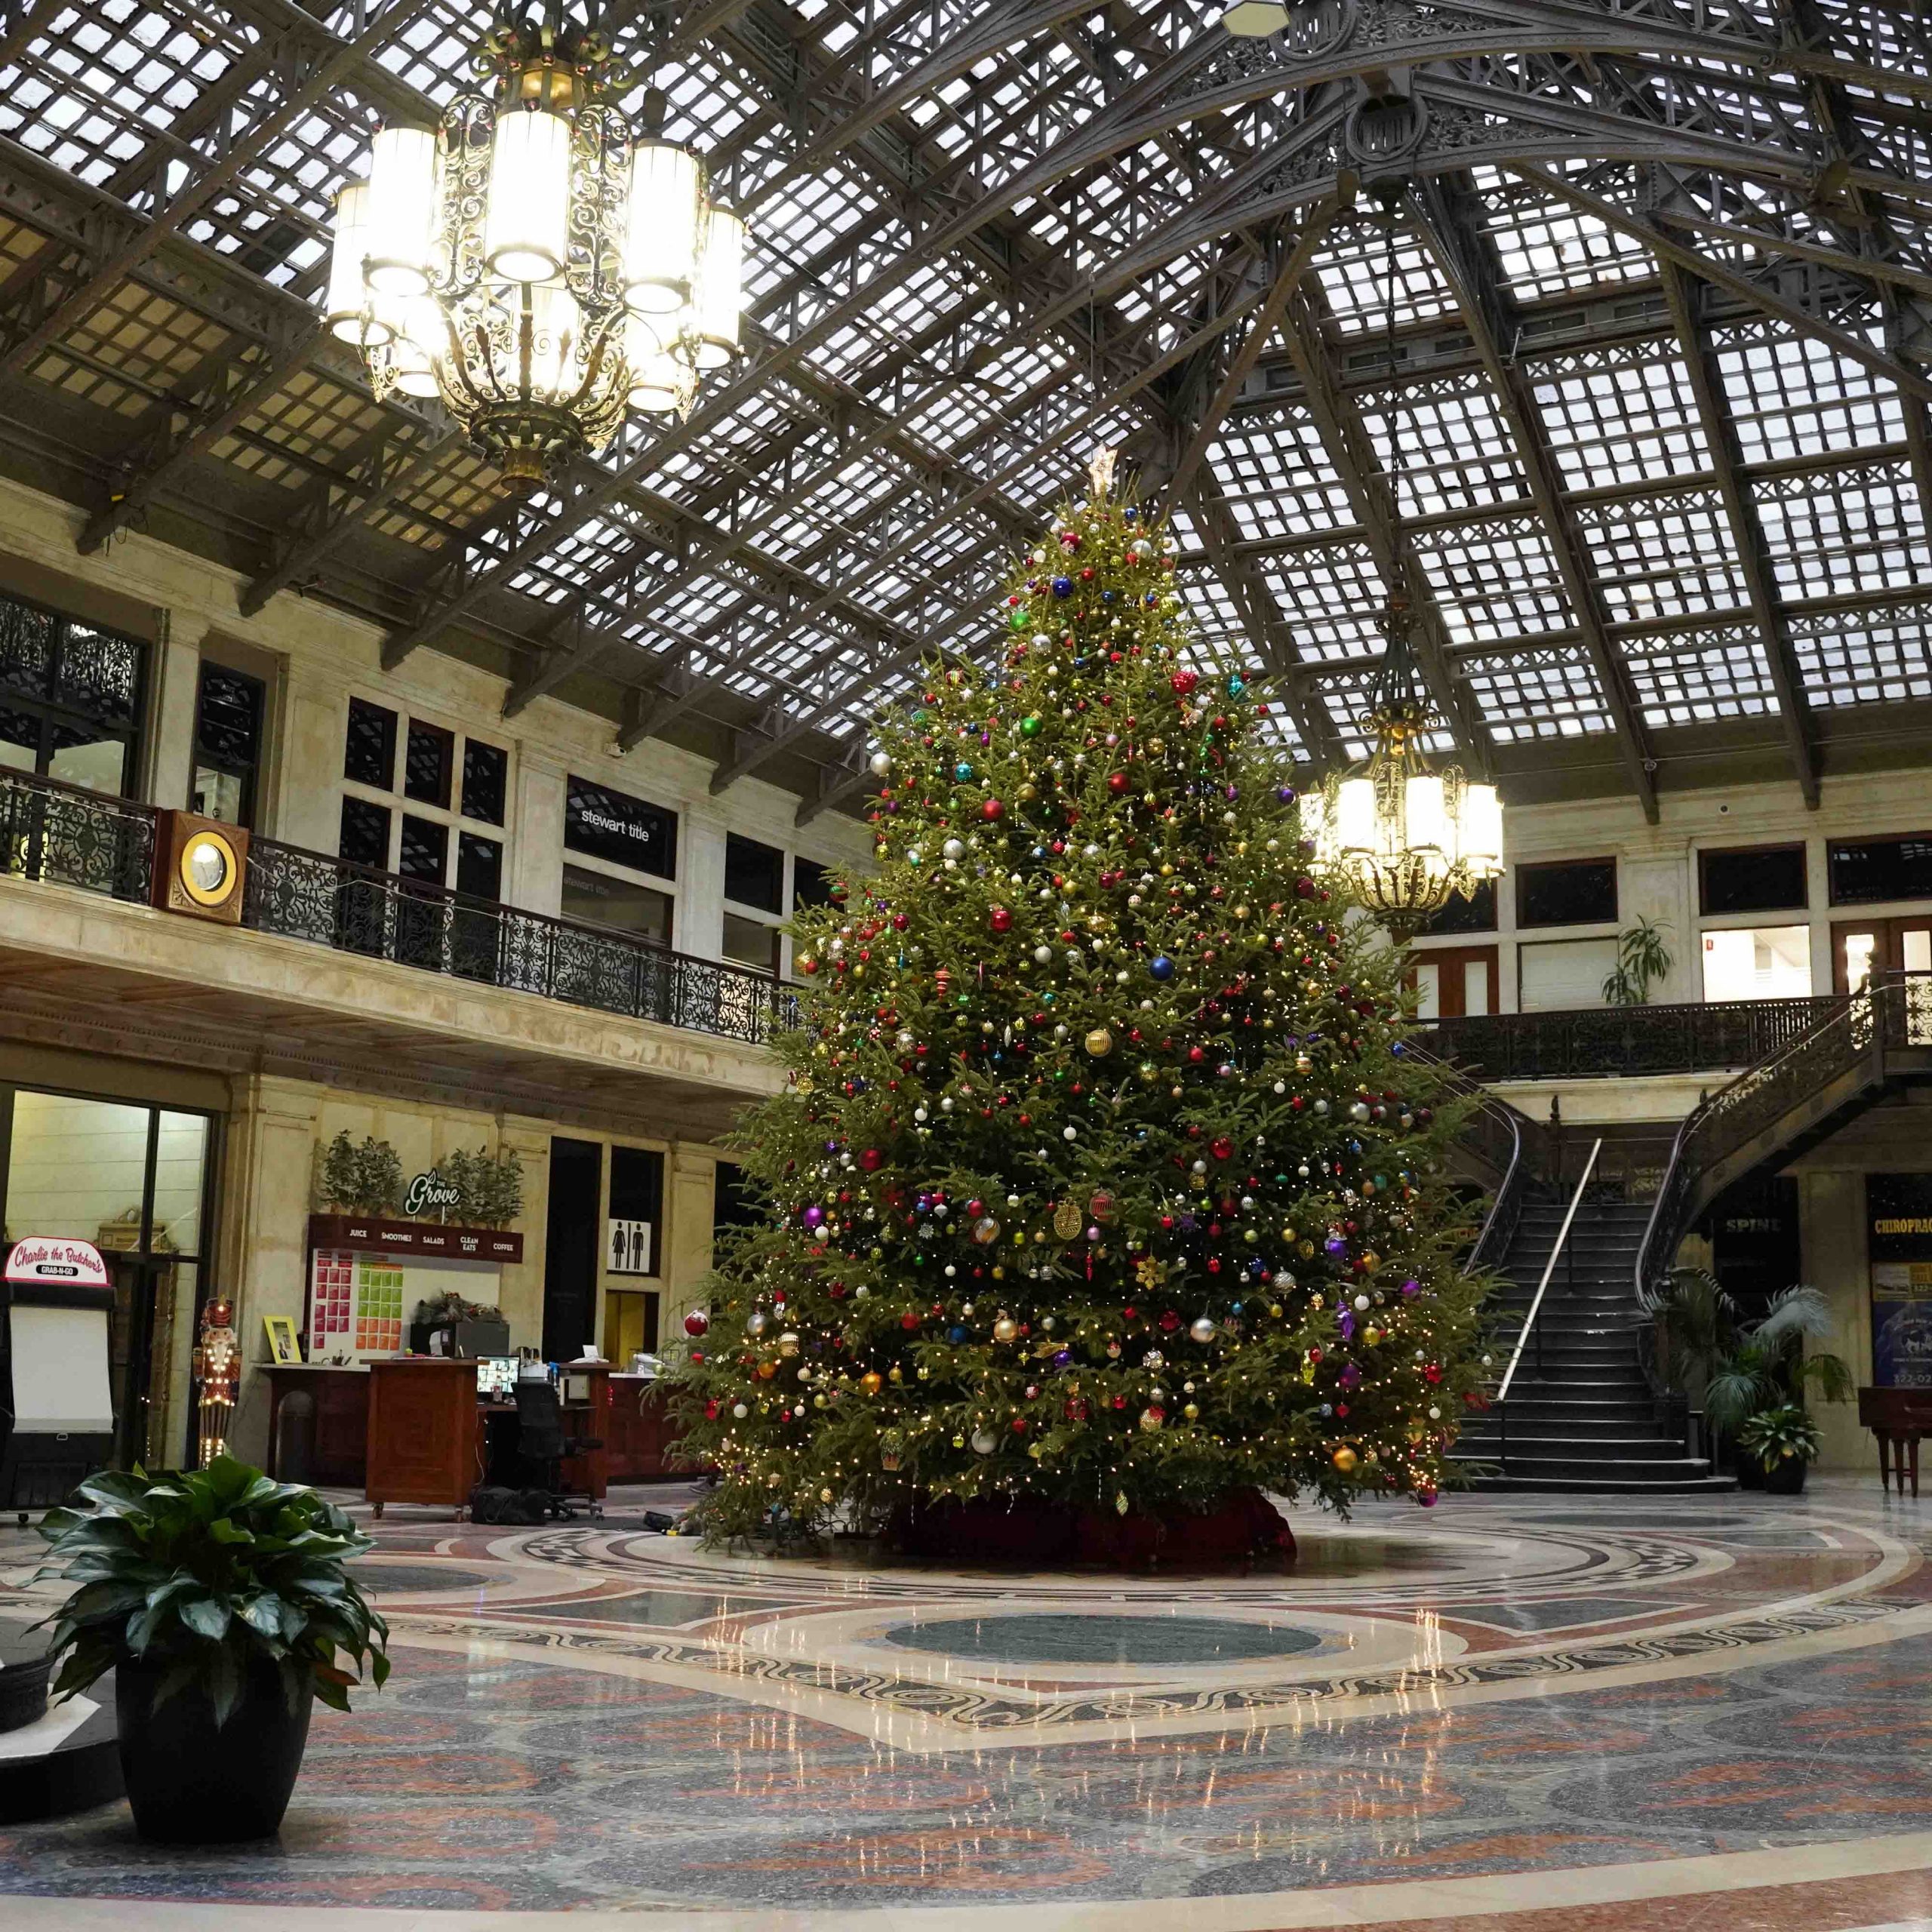 9 Ways Downtown Has Decked Out For the Holidays - Visit Buffalo Niagara